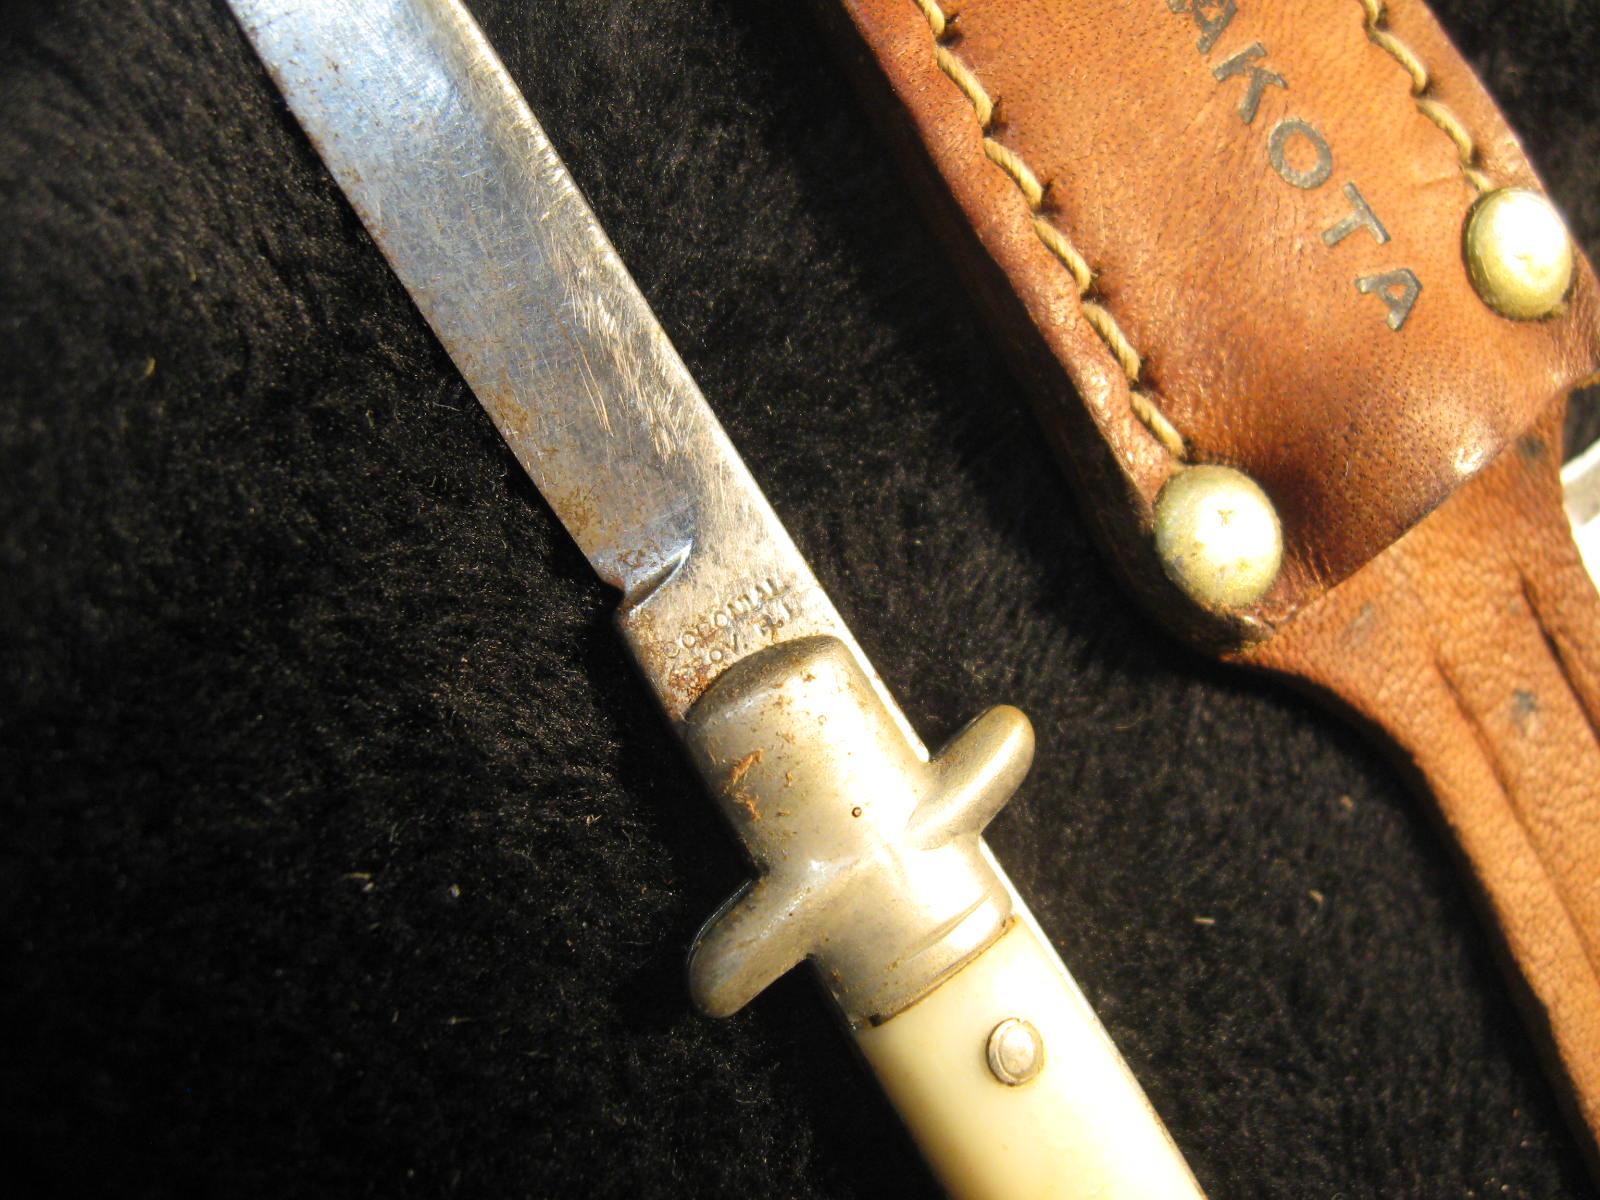 Very small North Dakota Sheath Souvenir Knife with Sheath. Manufactured by Colonial knife Co. in Pro